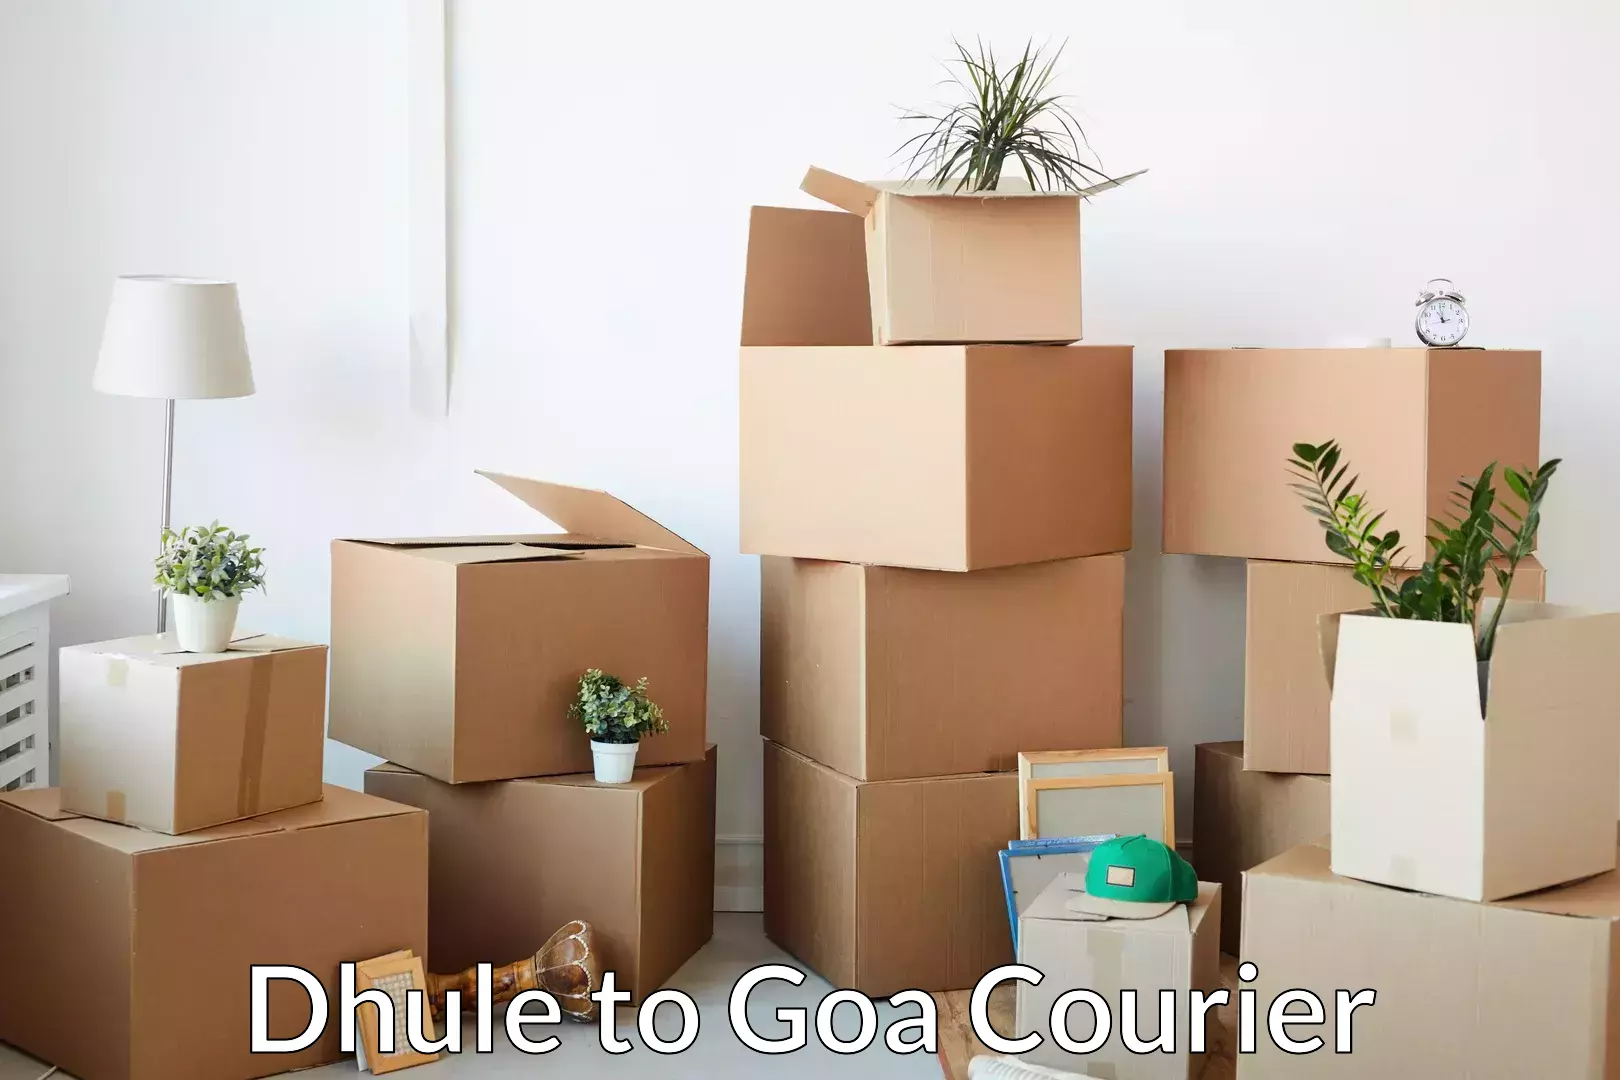 Trusted relocation experts Dhule to Goa